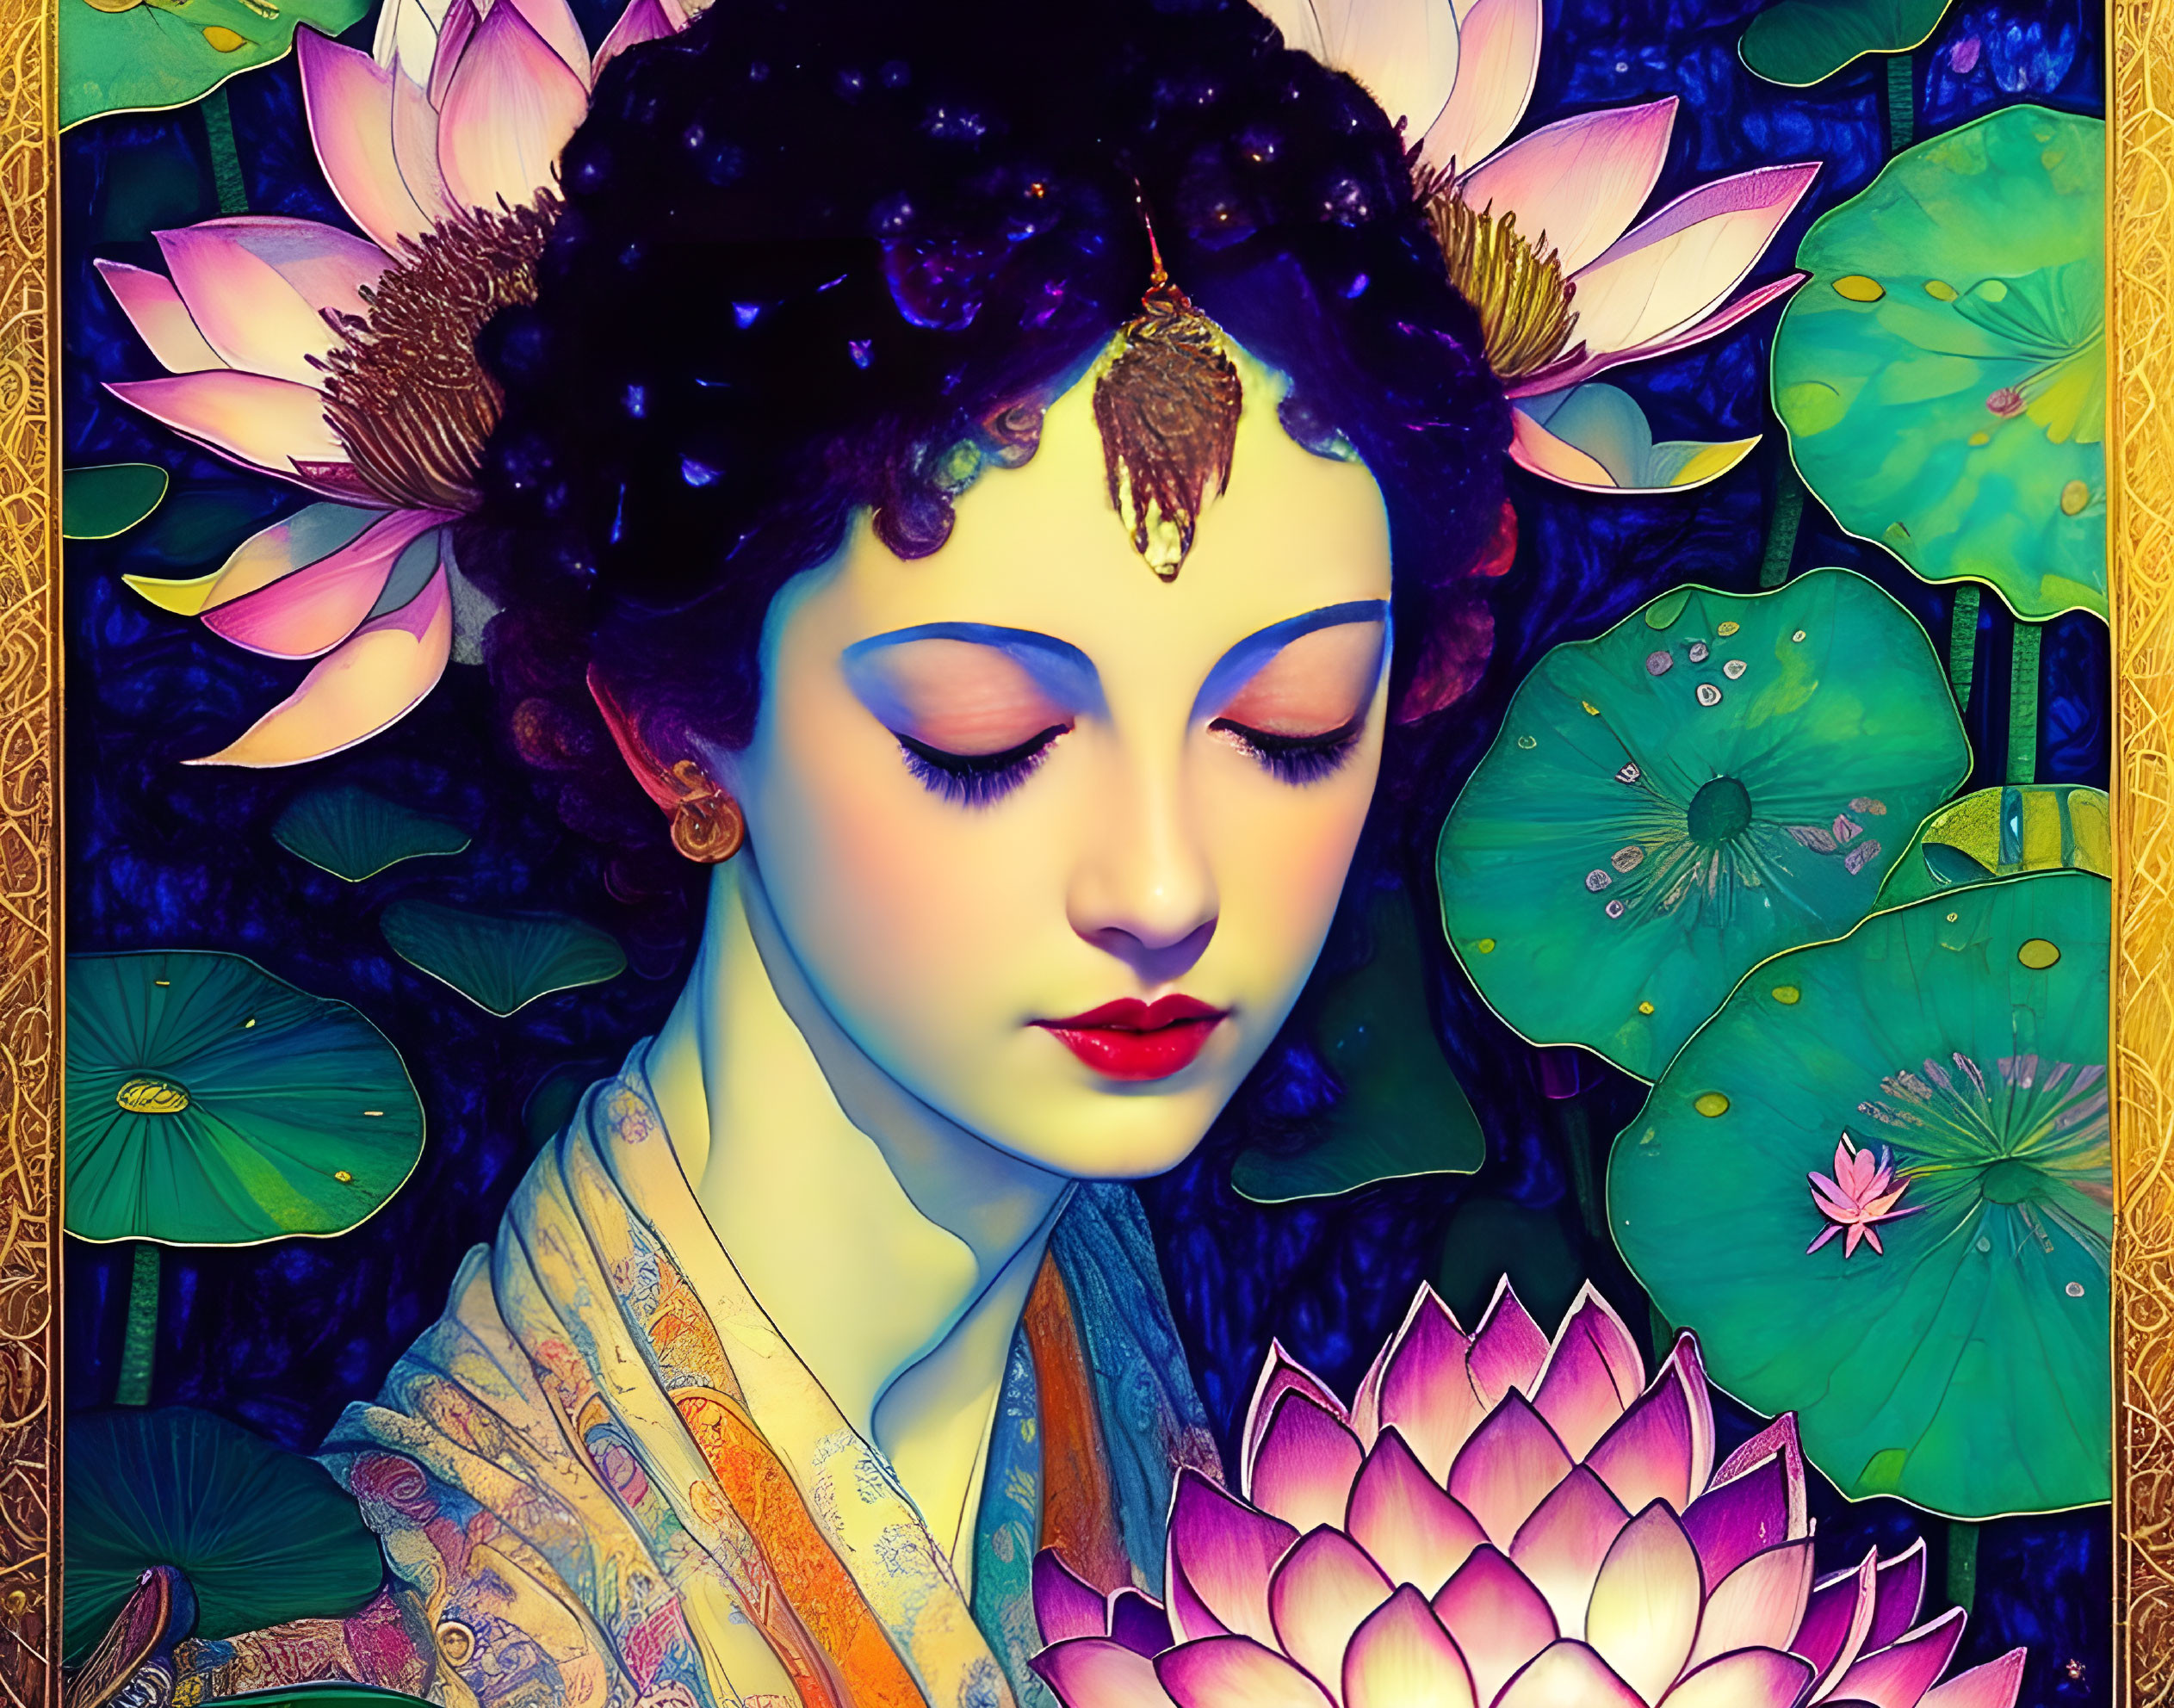 Female figure with intricate hair decoration among lotus flowers in Asian art style